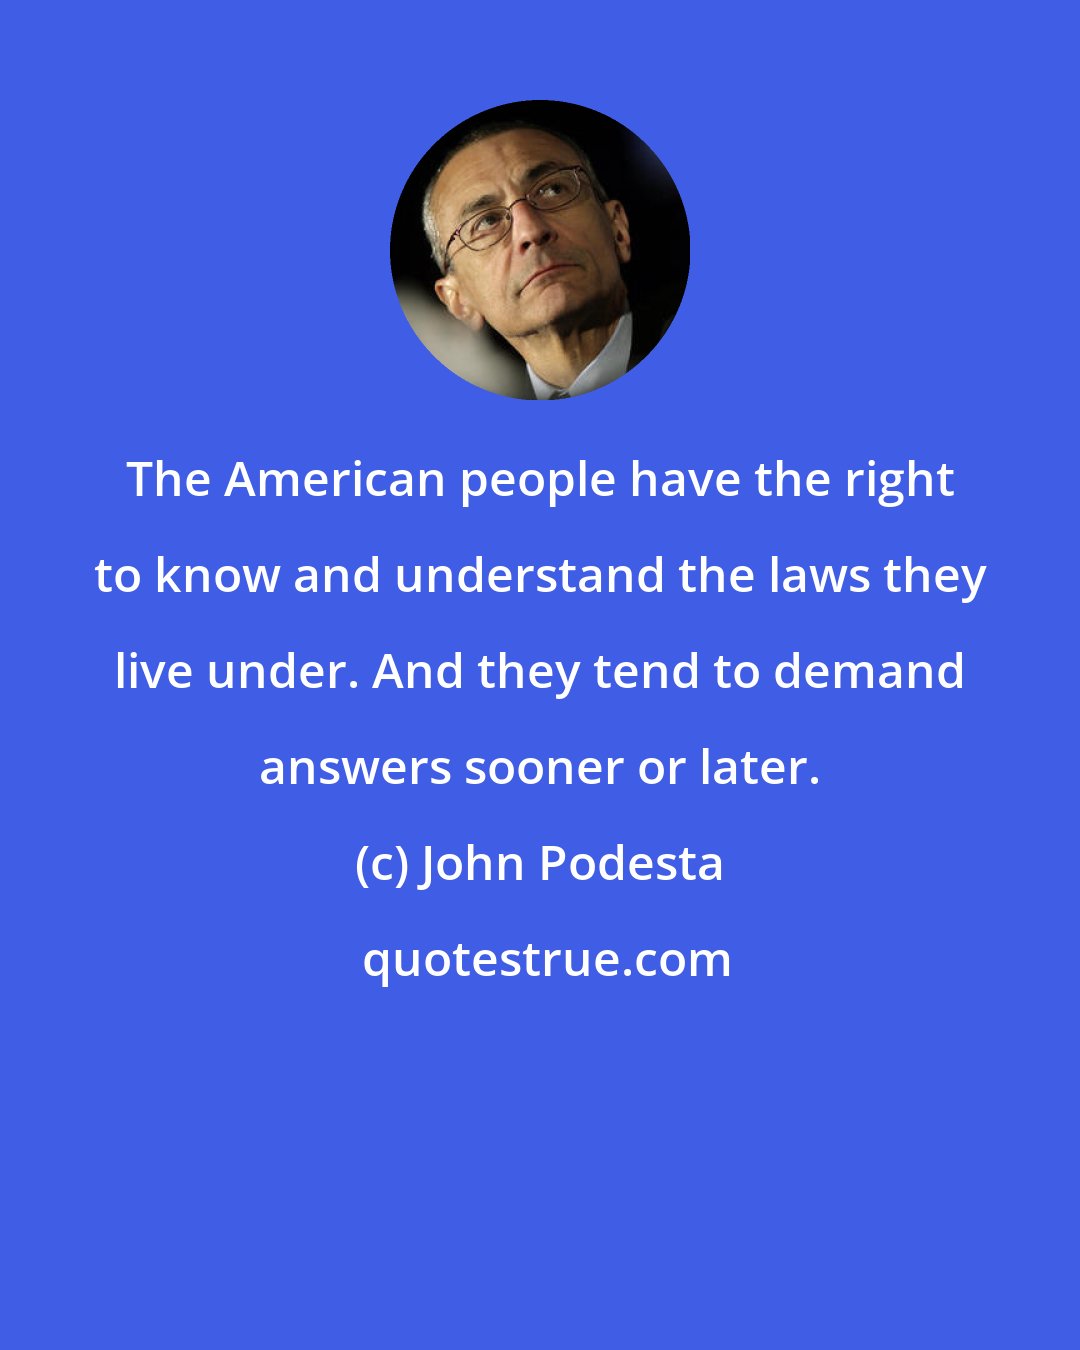 John Podesta: The American people have the right to know and understand the laws they live under. And they tend to demand answers sooner or later.